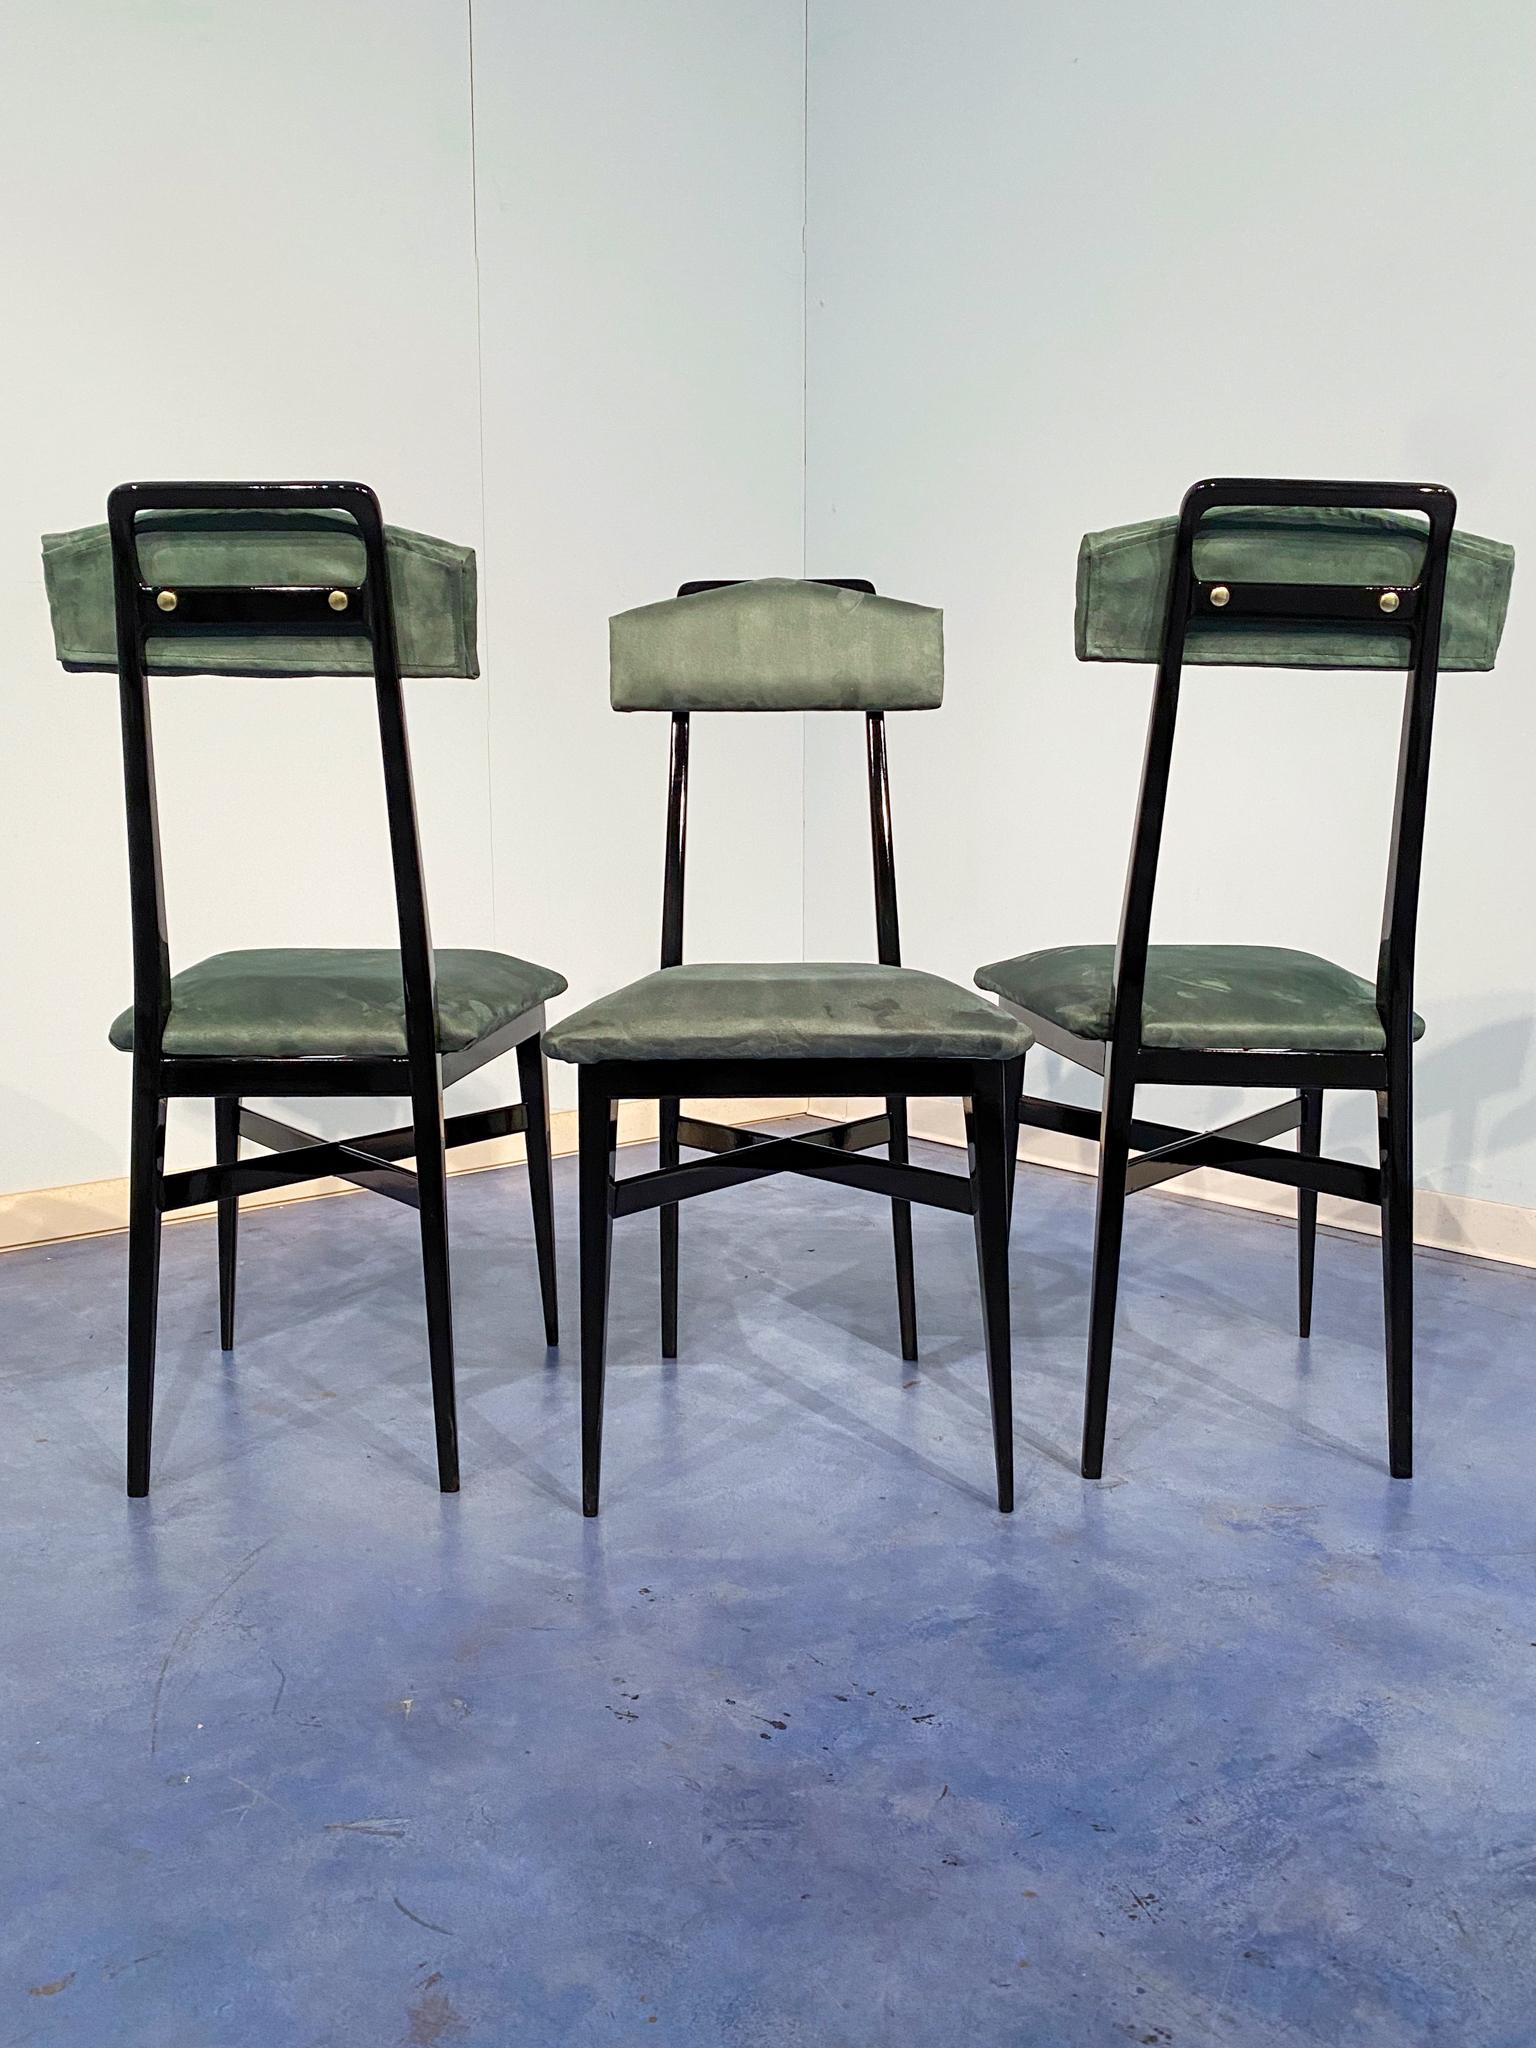 Italian Mid-Century Black and Green Color Dining Chairs, Set of Six, 1950s For Sale 1